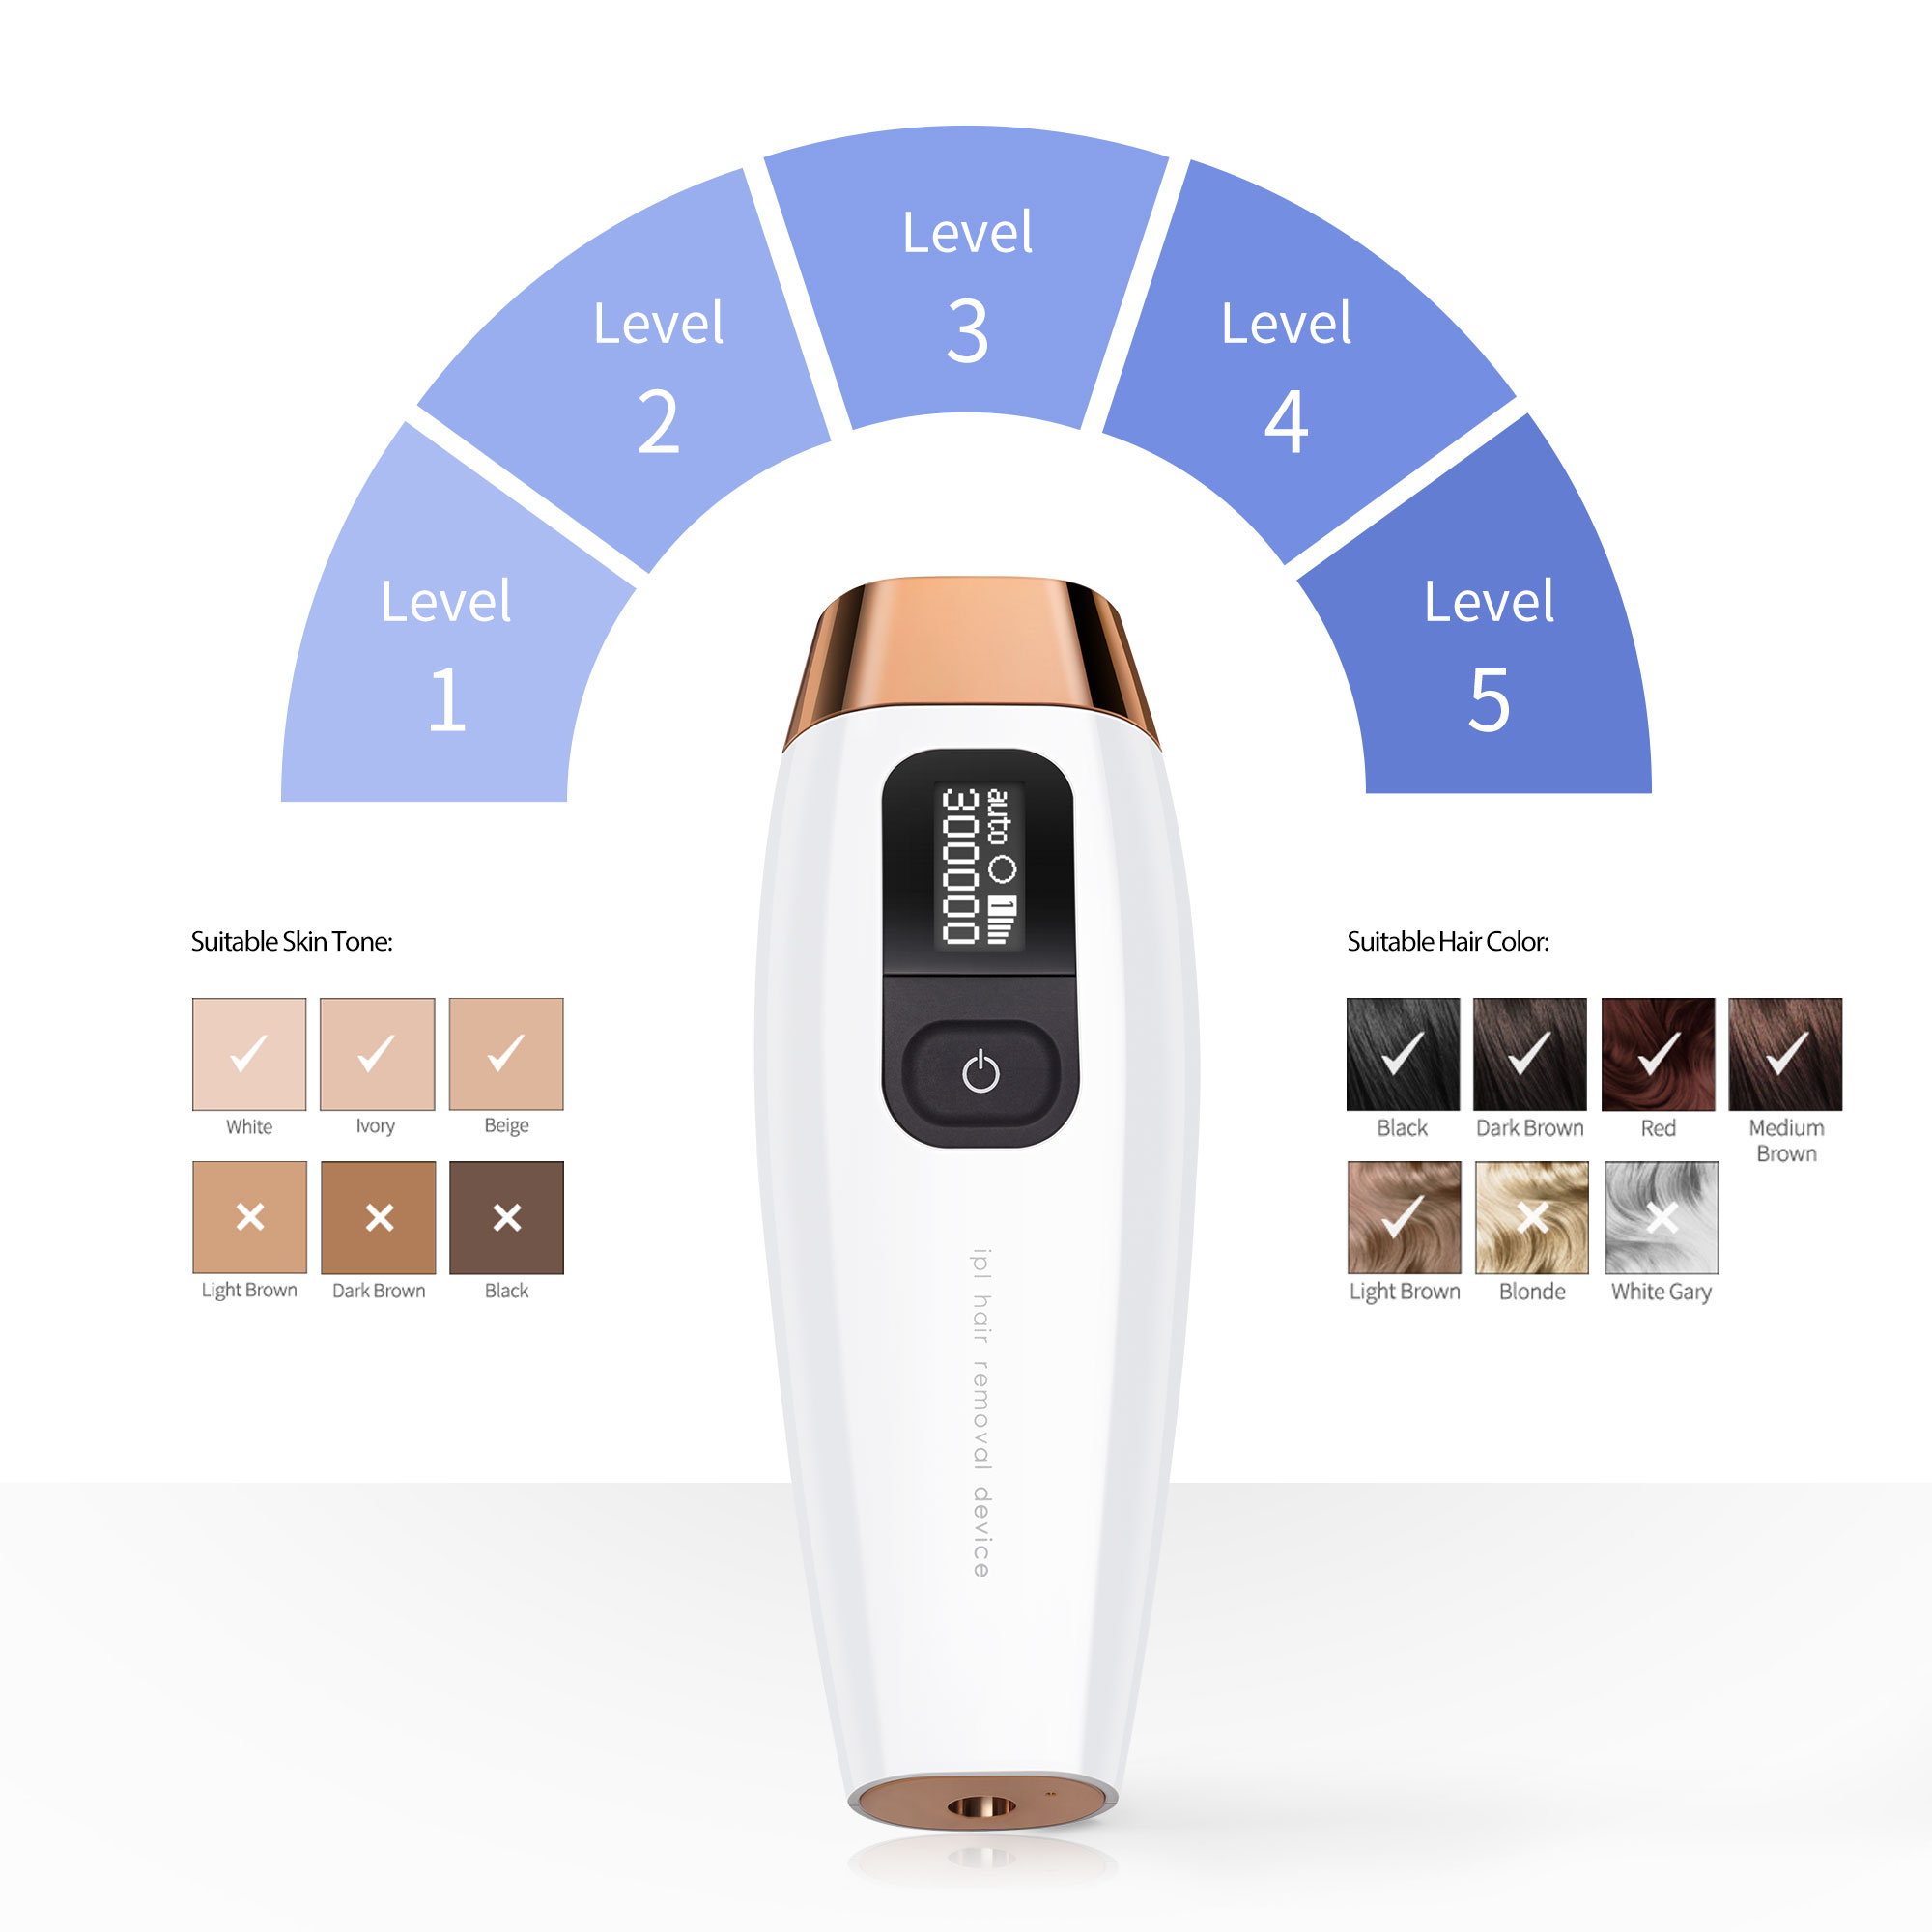 CosBeauty CB306 300000 Flashes Pulse Laser Epilator Household Permanent Hair Removal Machine Body Painless Electric Depilador